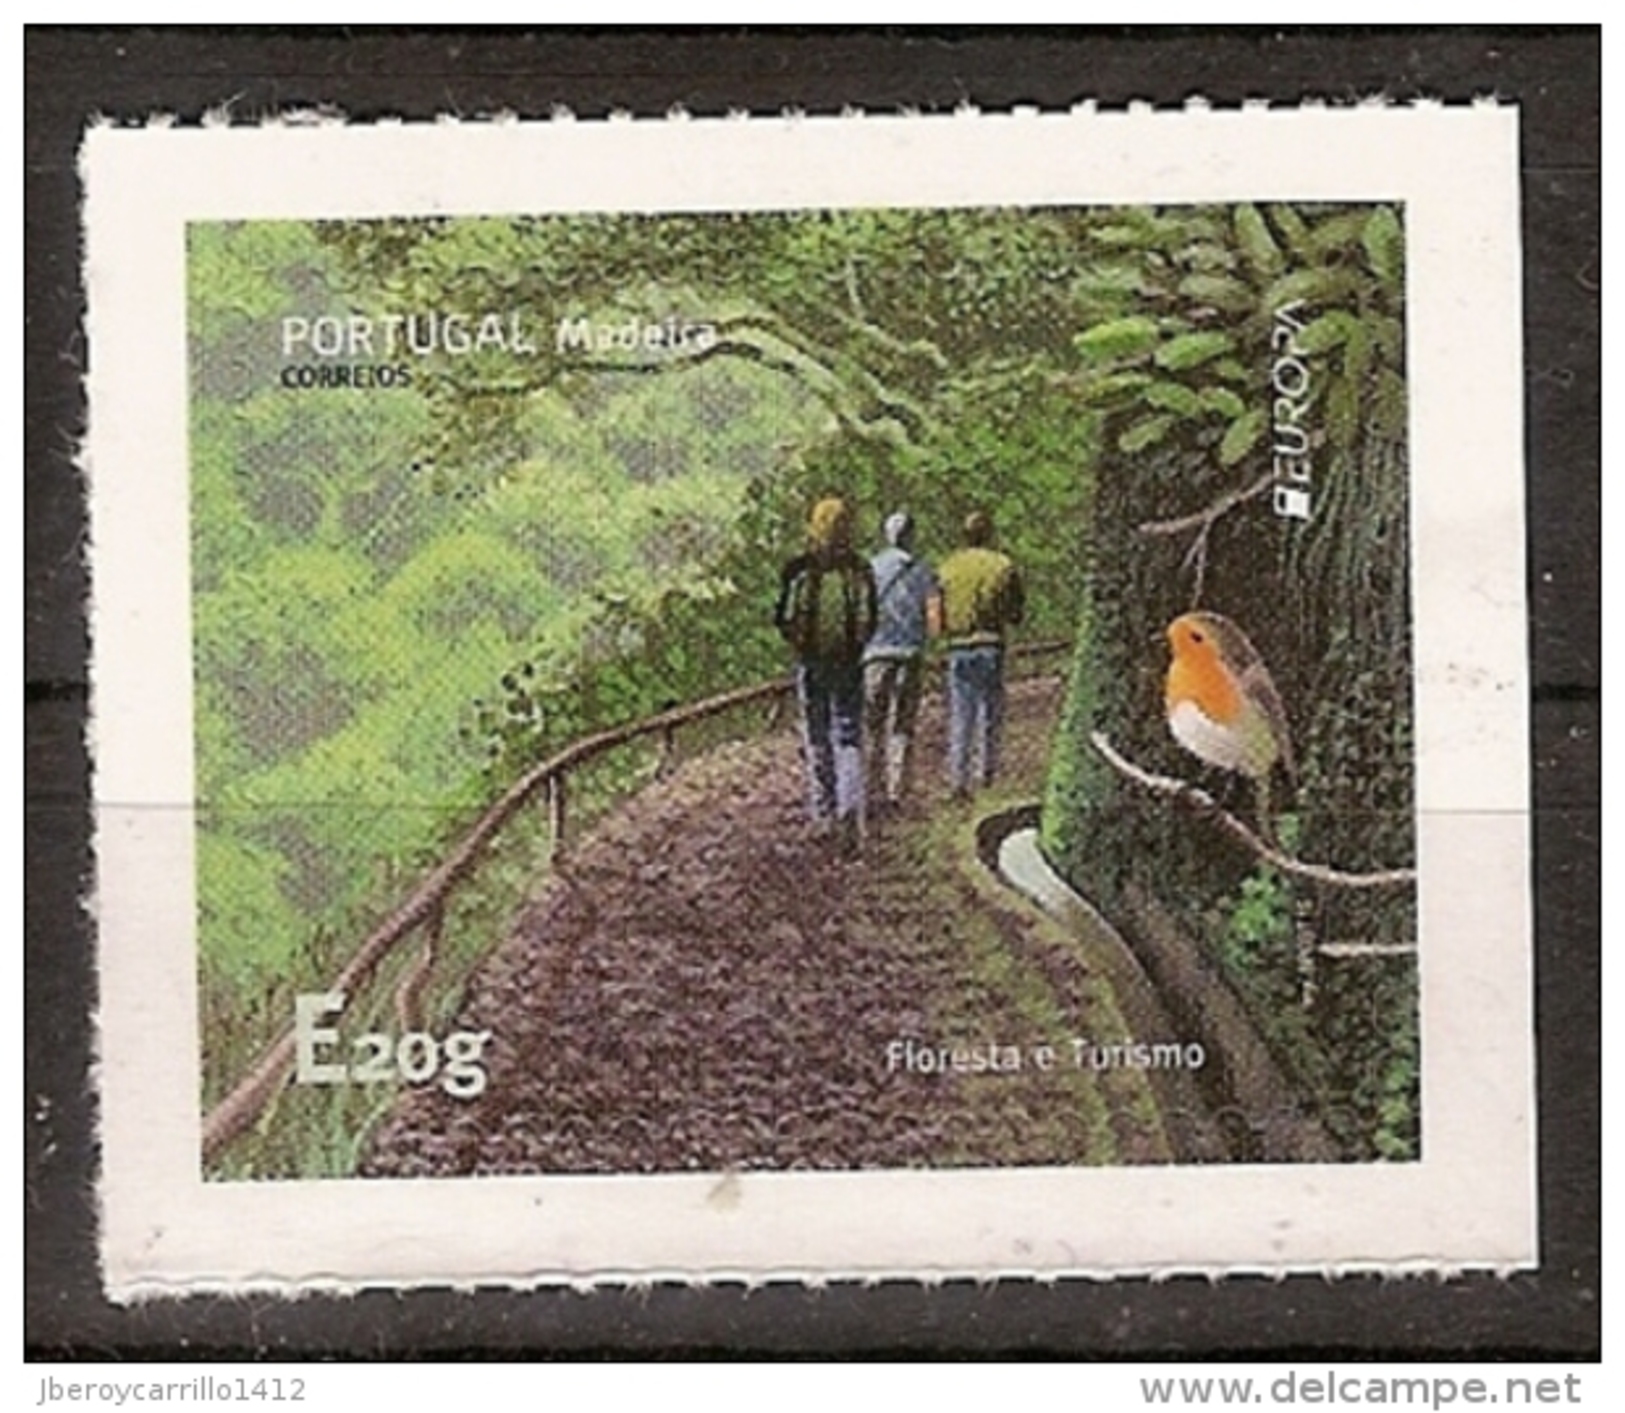 MADEIRA 2015 -EUROPA-CEPT (2011 "FOREST") -BIRDS -TOURISM WATER AND FLORESTALES TREES - 1 V. FRANCOBOLLI ADESIVO - 2014